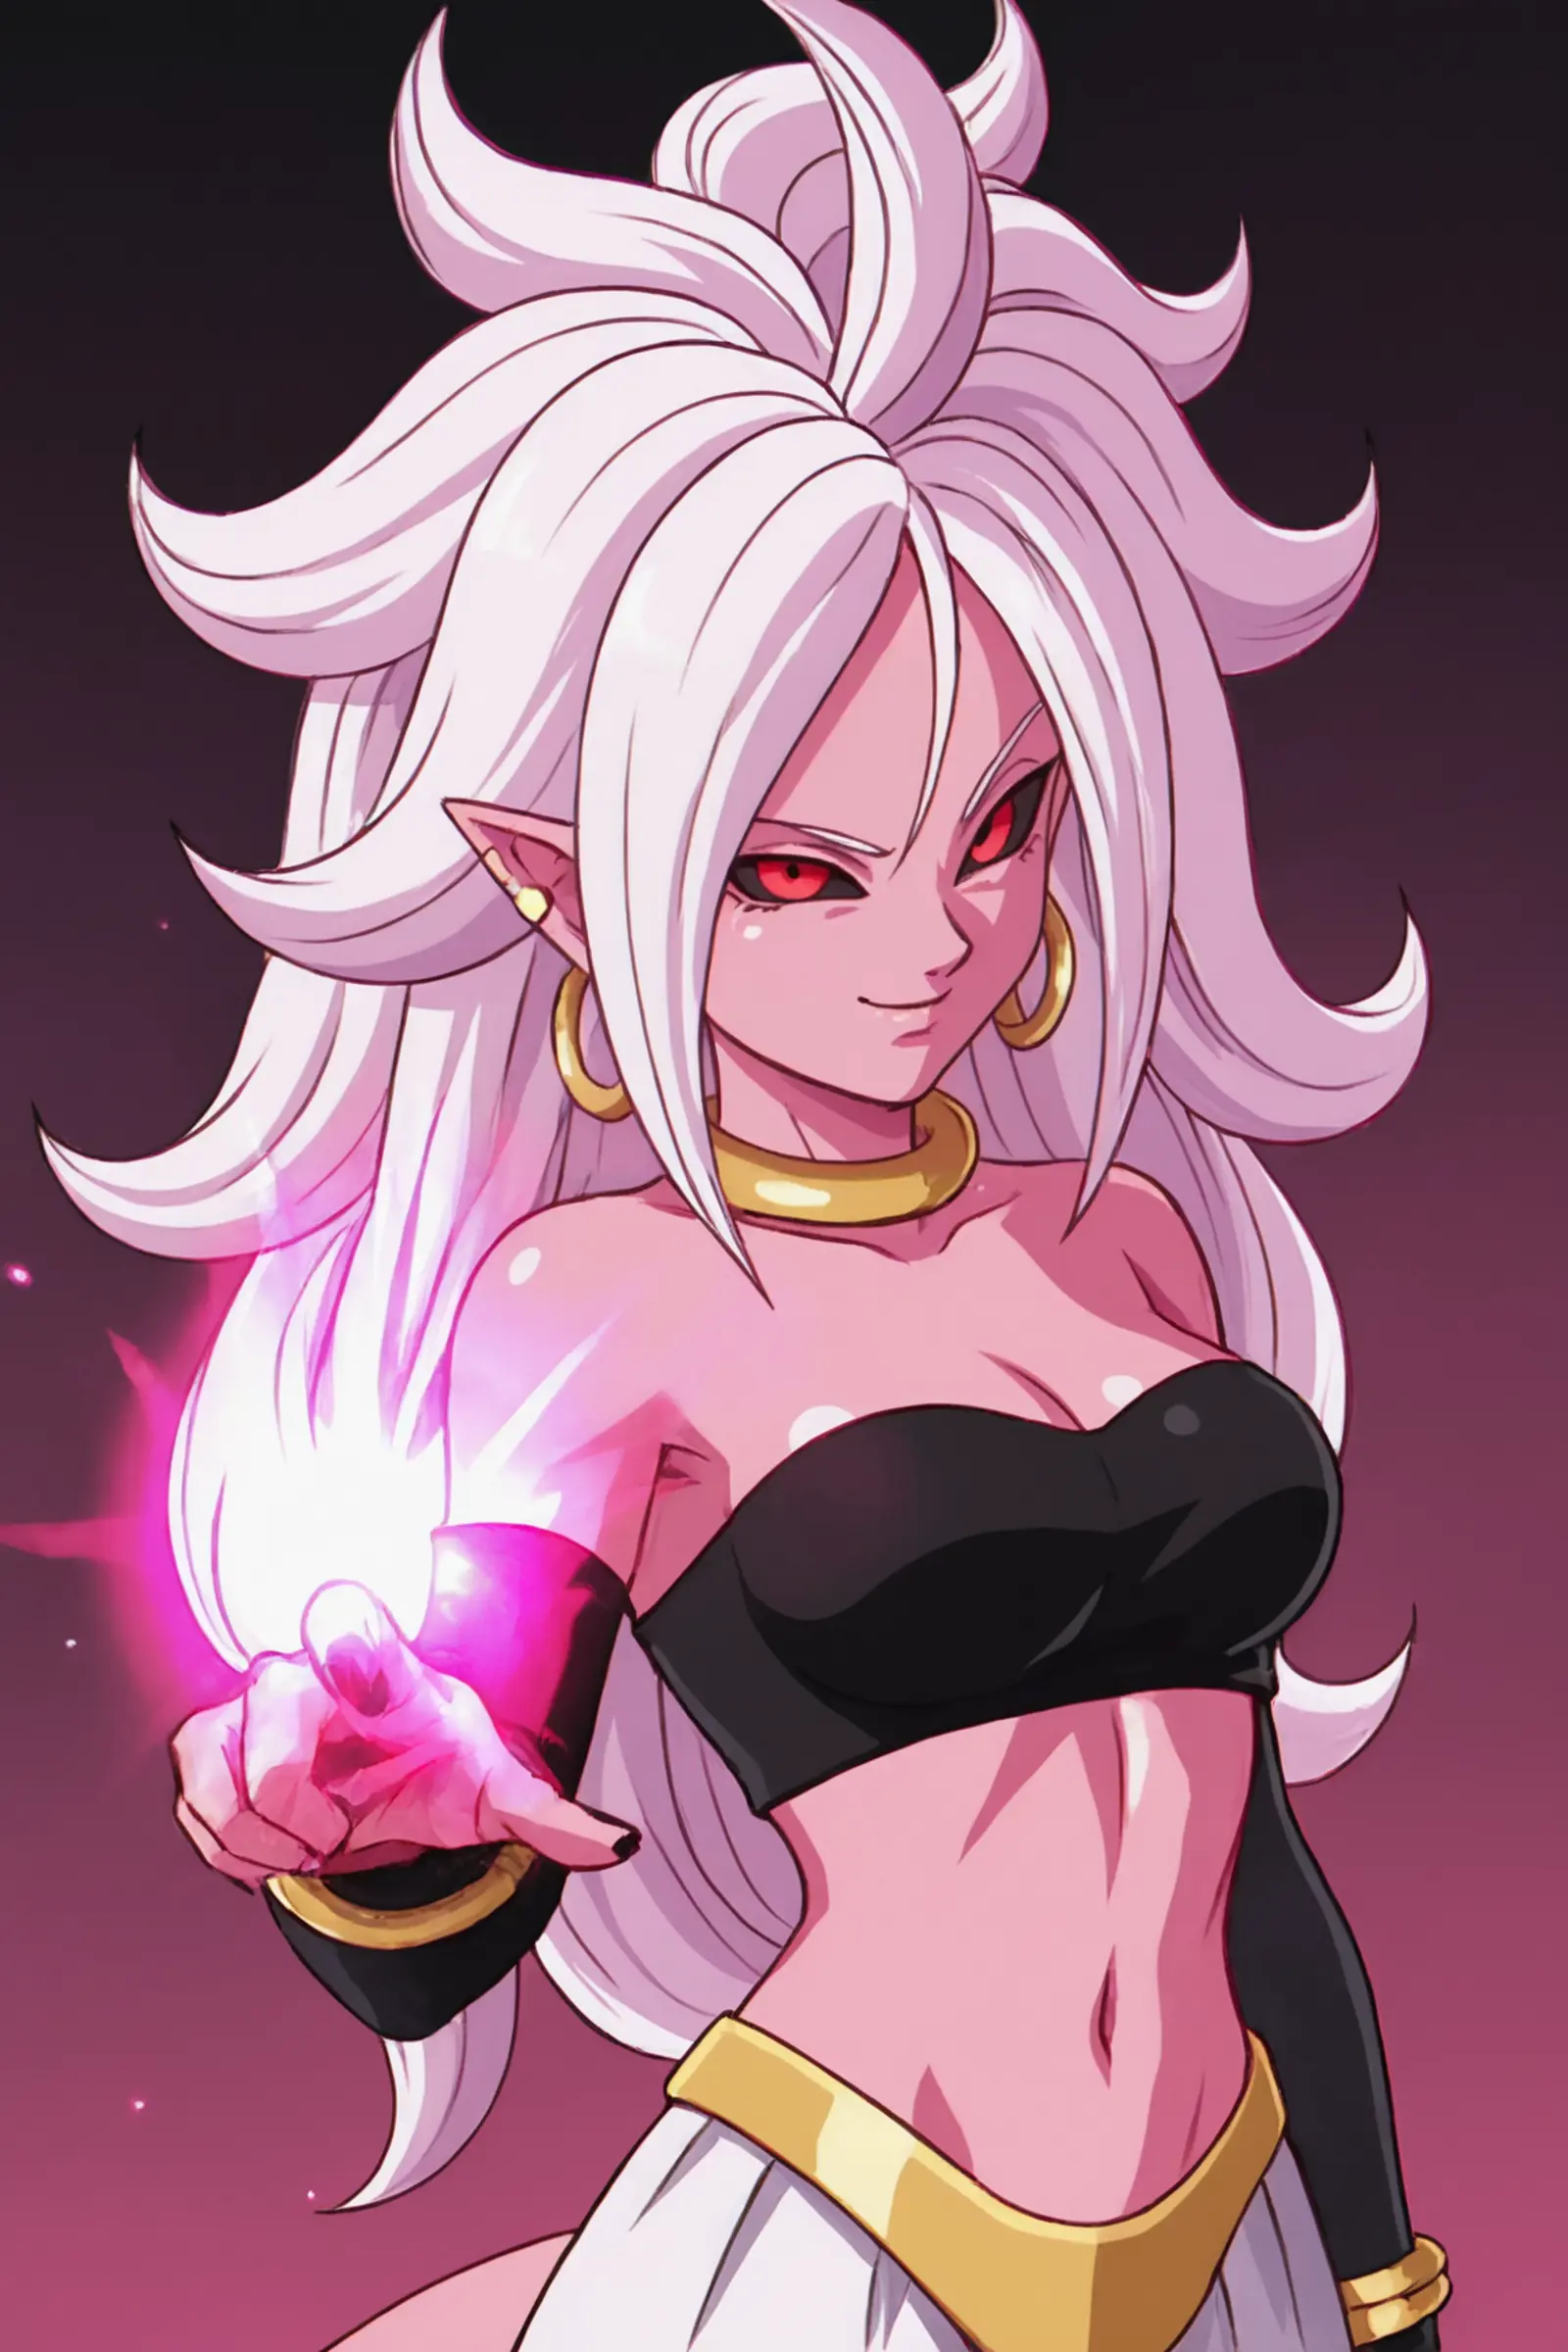 A woman with wild pink hair wearing a black top and white puffy pants. She is holding out their hand, pointing her finger, with a glowing pink orb of energy floating in front of it.